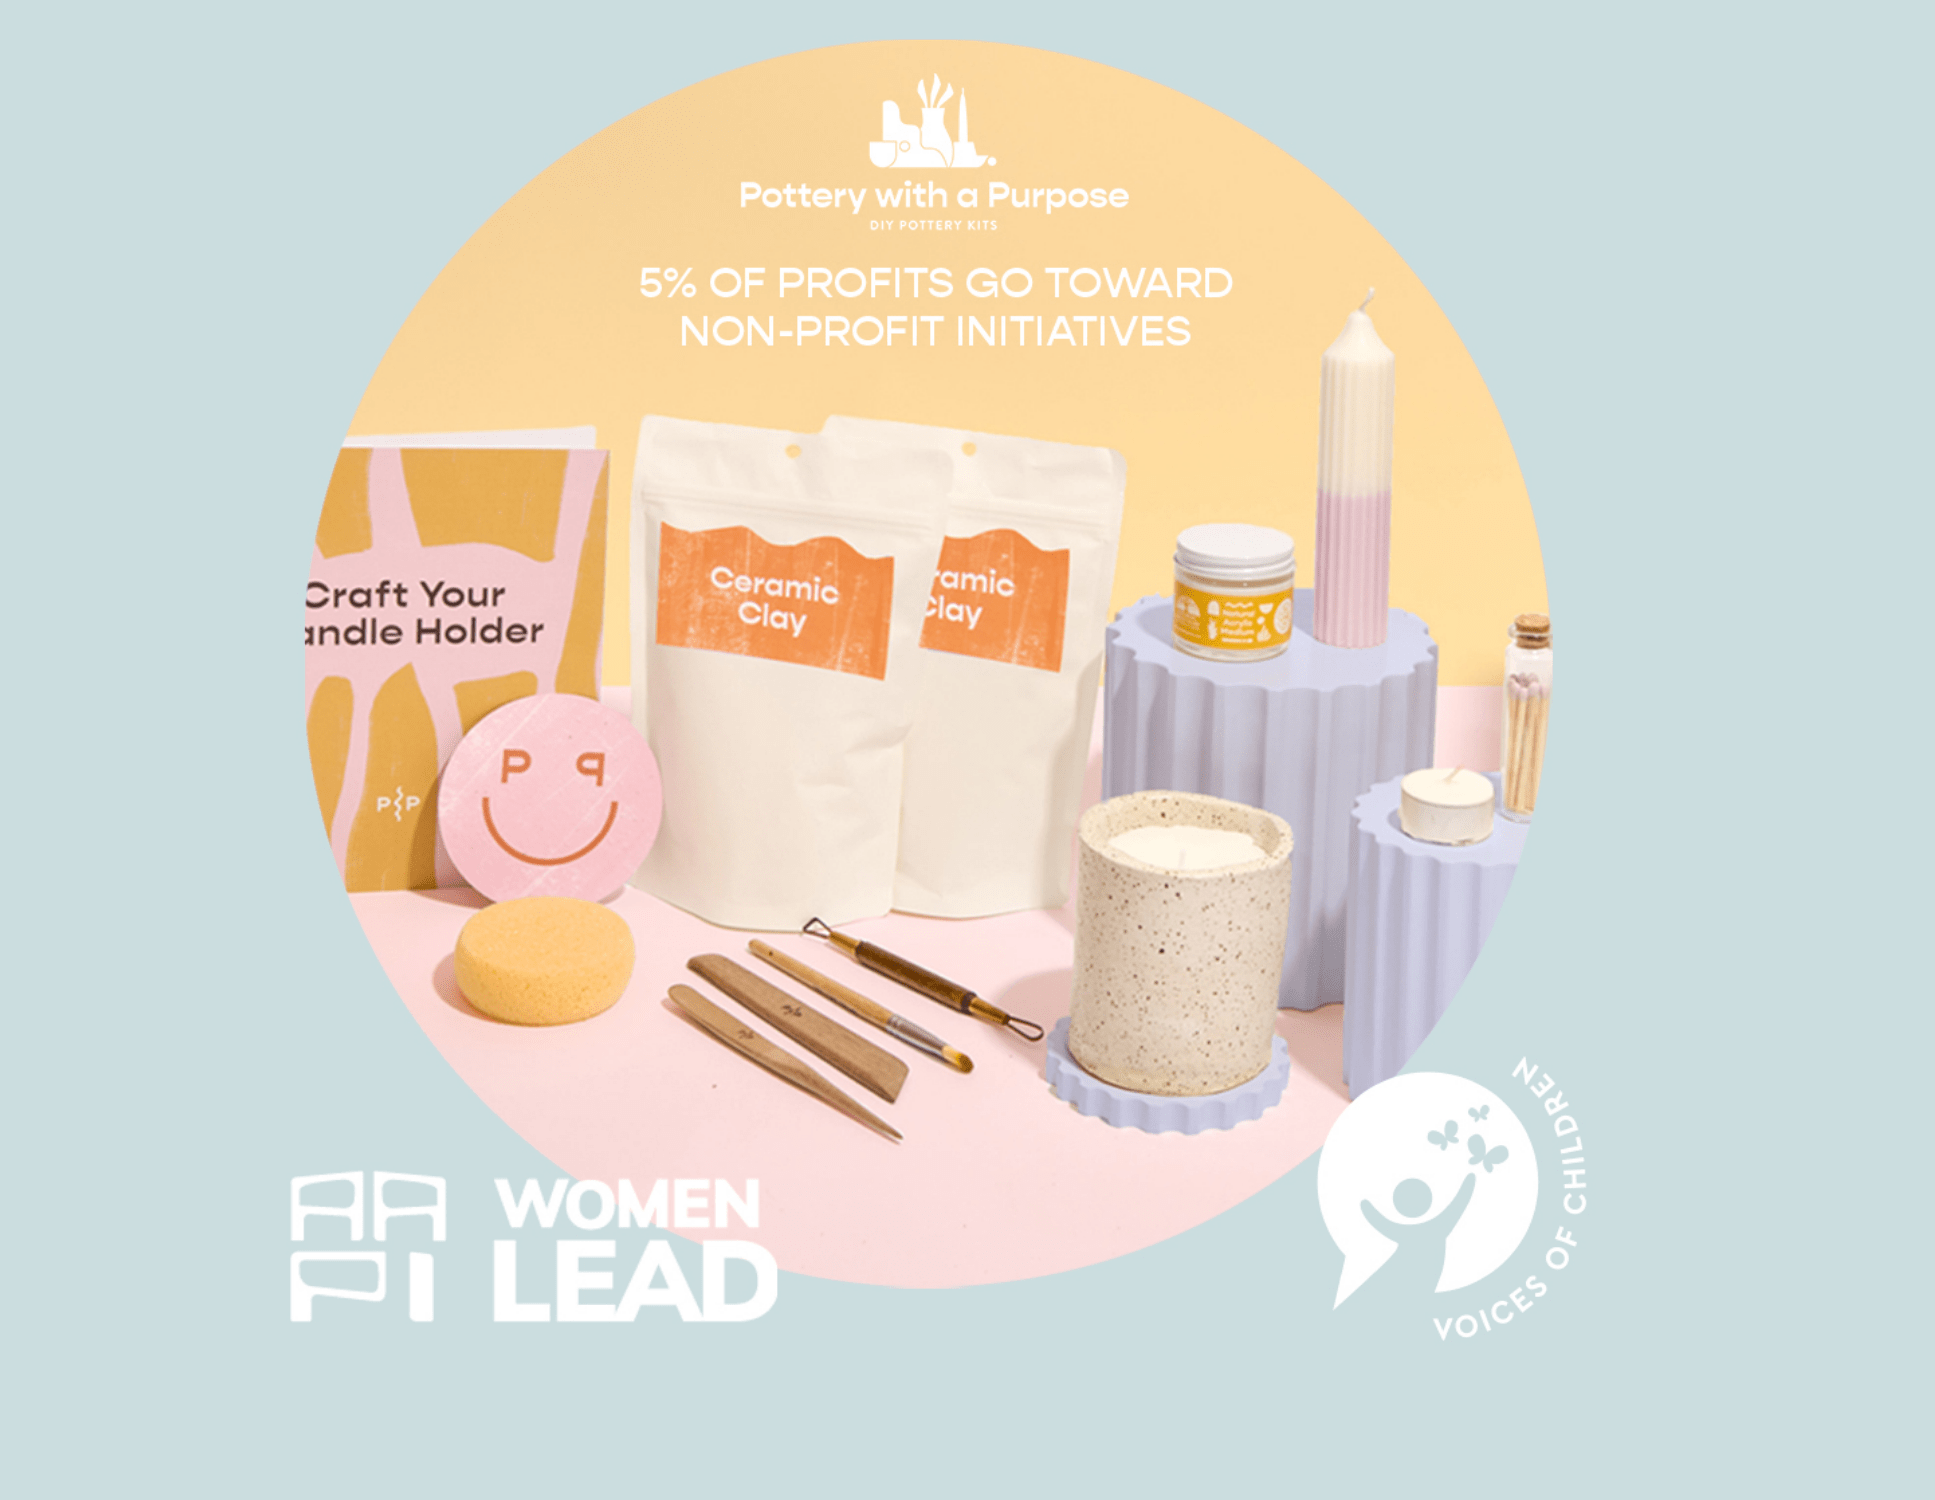 Shown is an image of a DIY Pottery Kit with the logos of AAPI Women Lead and Voices of Children who are donation recipients this quarter